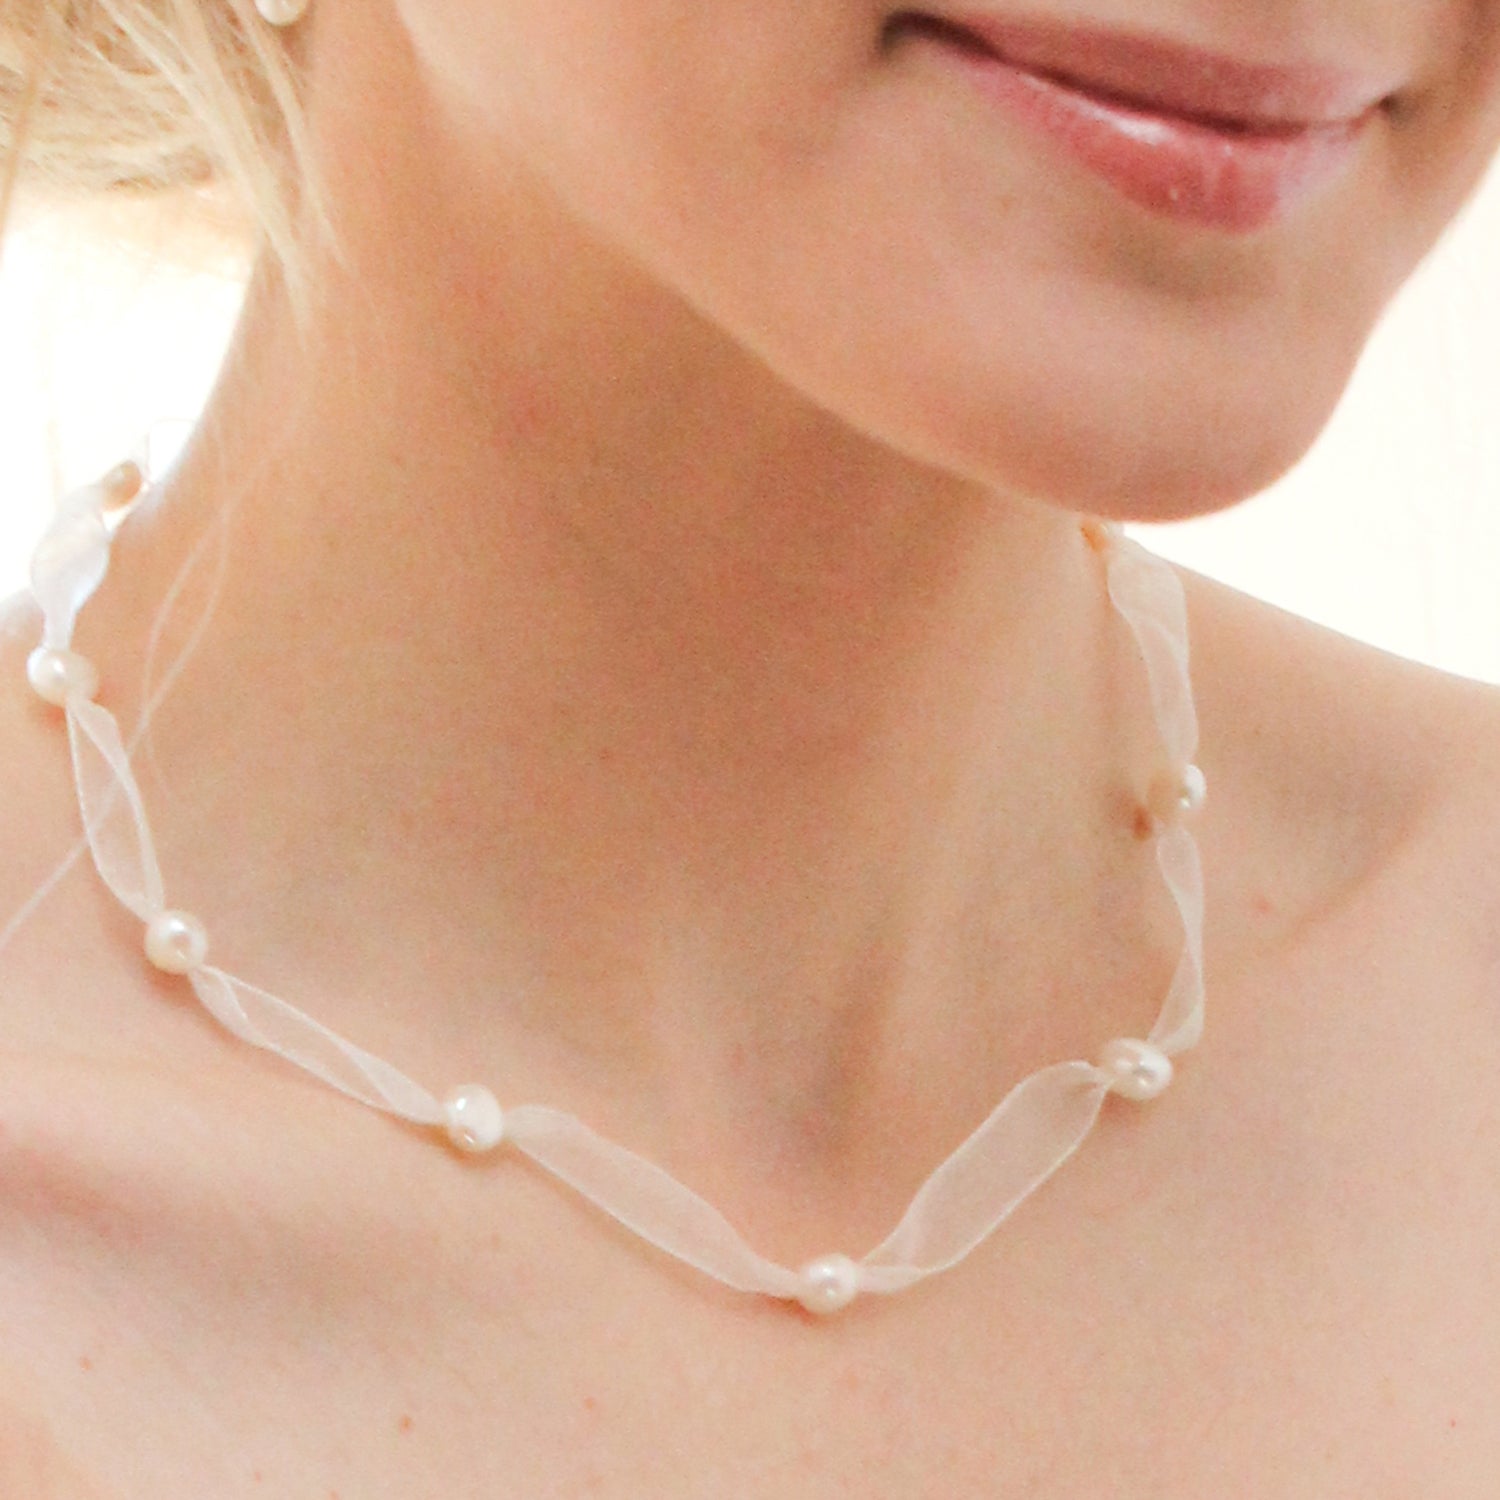 Innocence Pearl and Ribbon Necklace Bridal jewelry on model